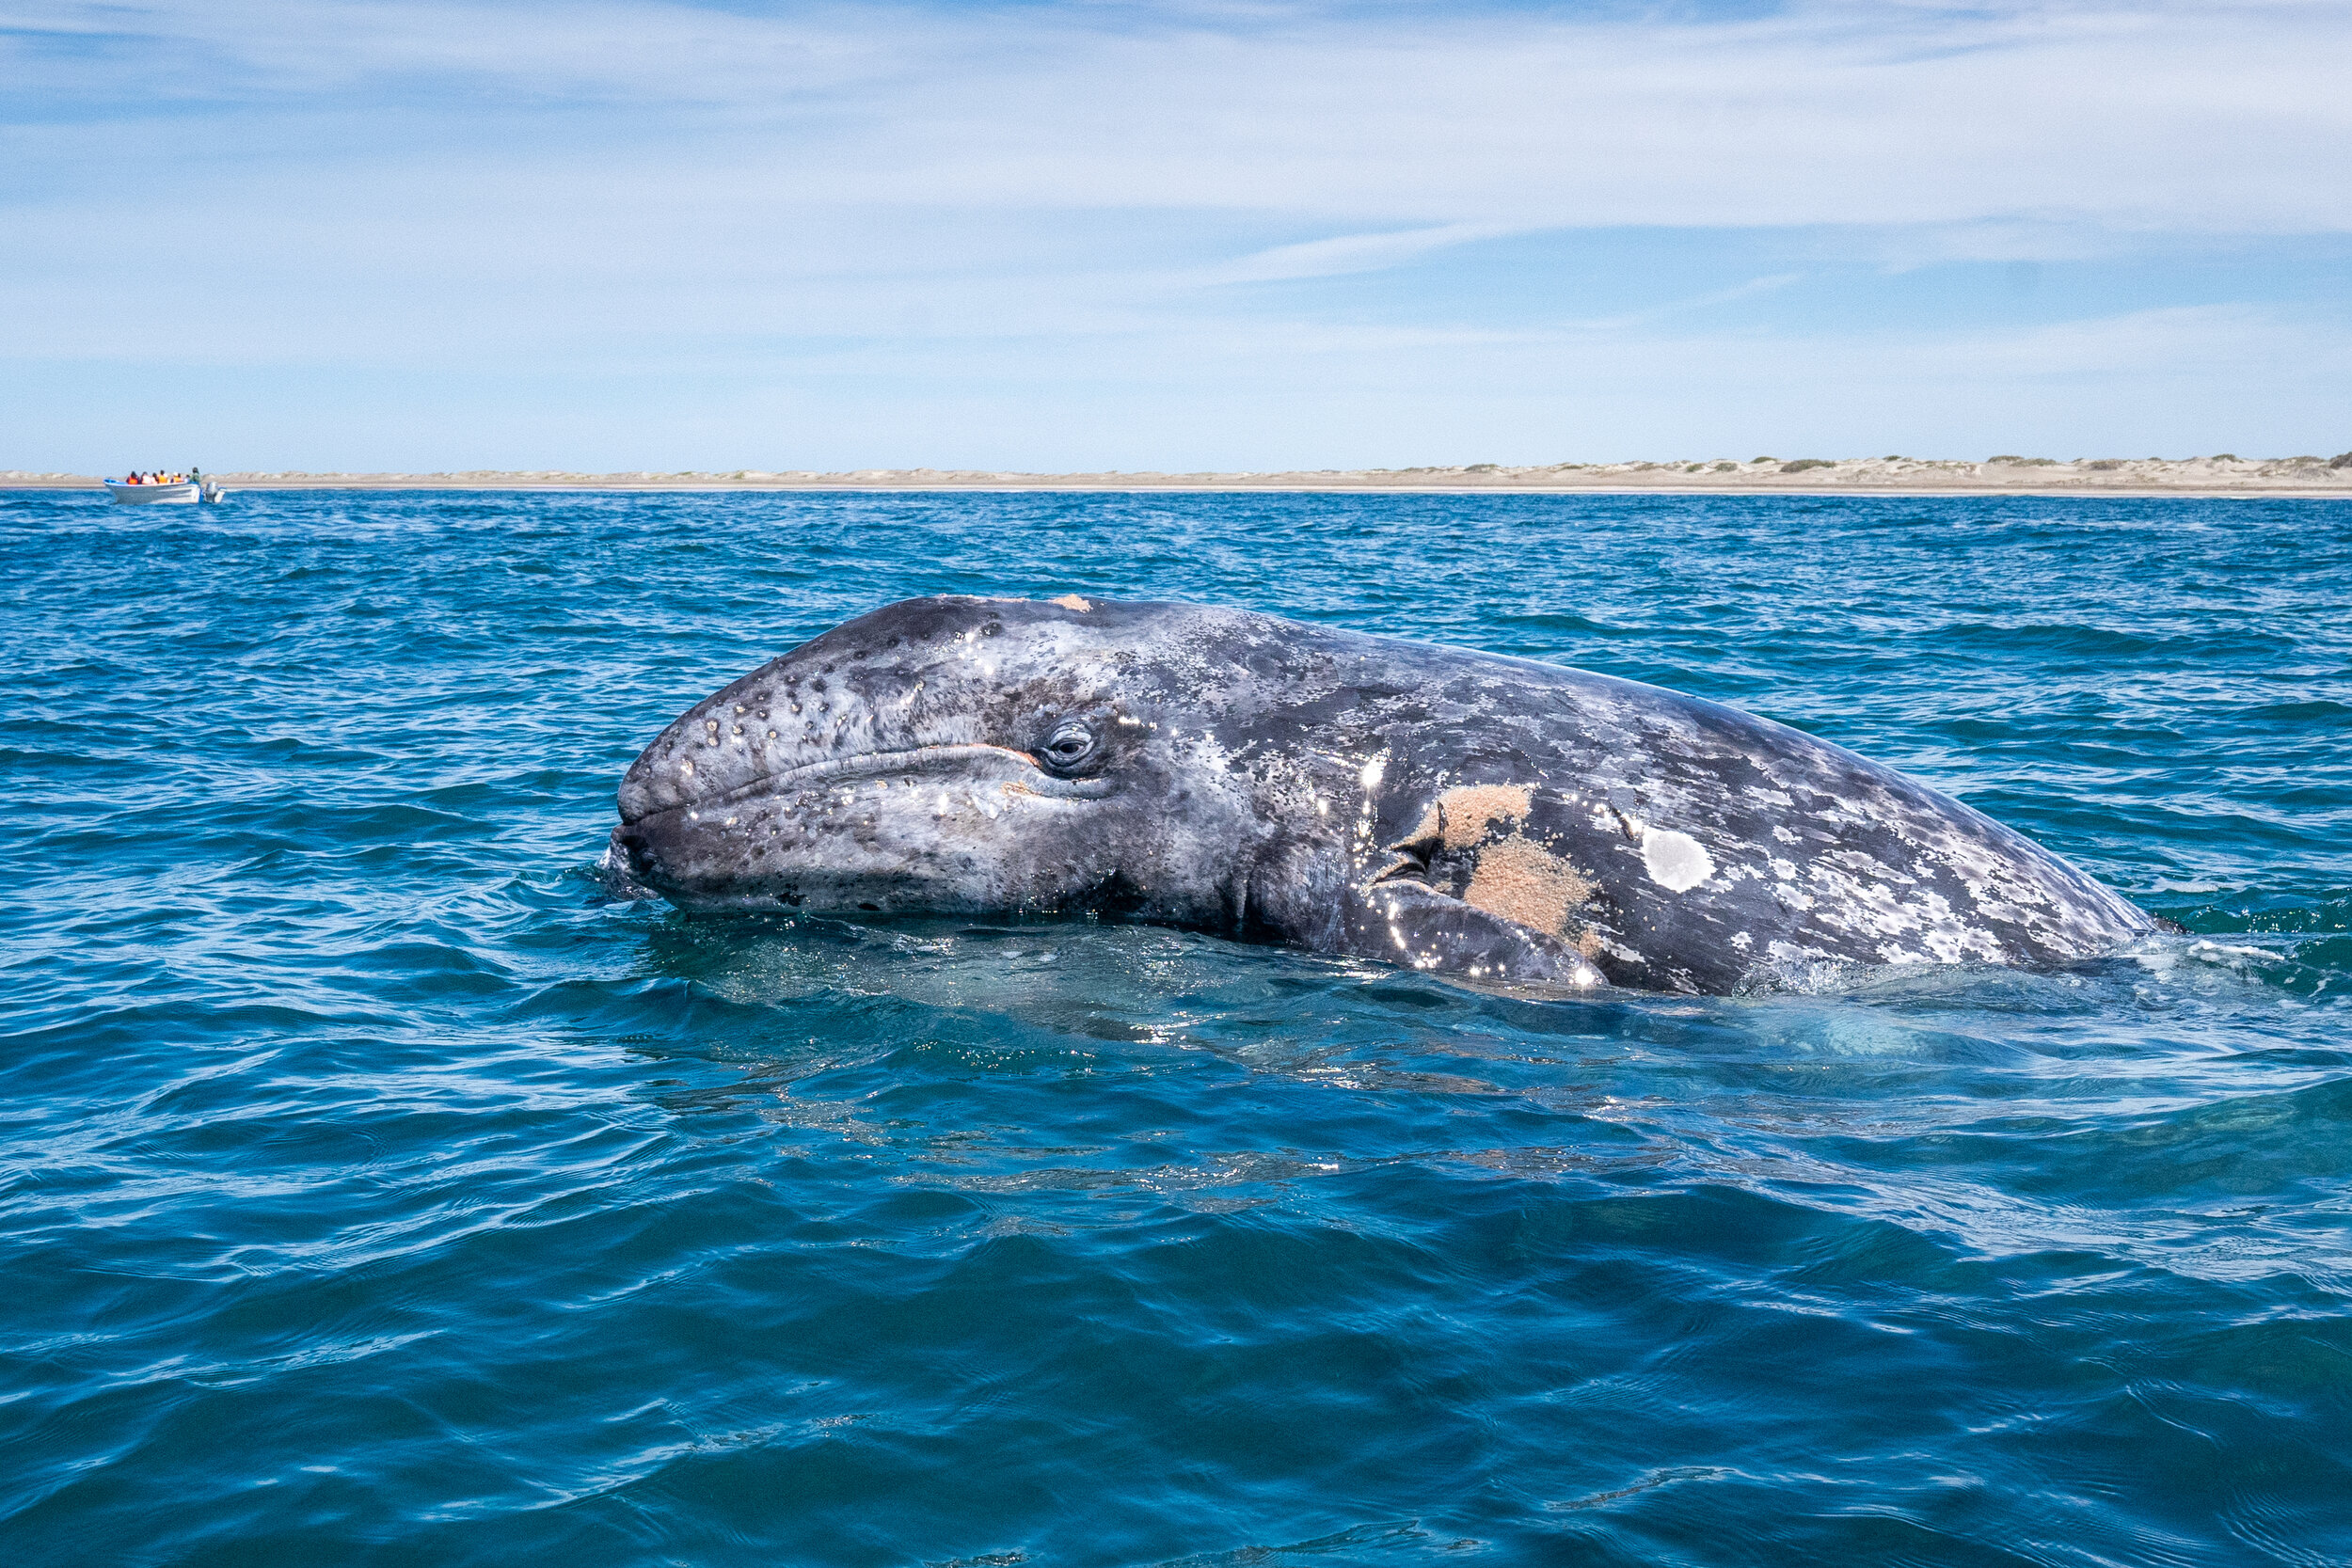 A newly born gray whale calf rides on its mom's back in Baja California, Mexico